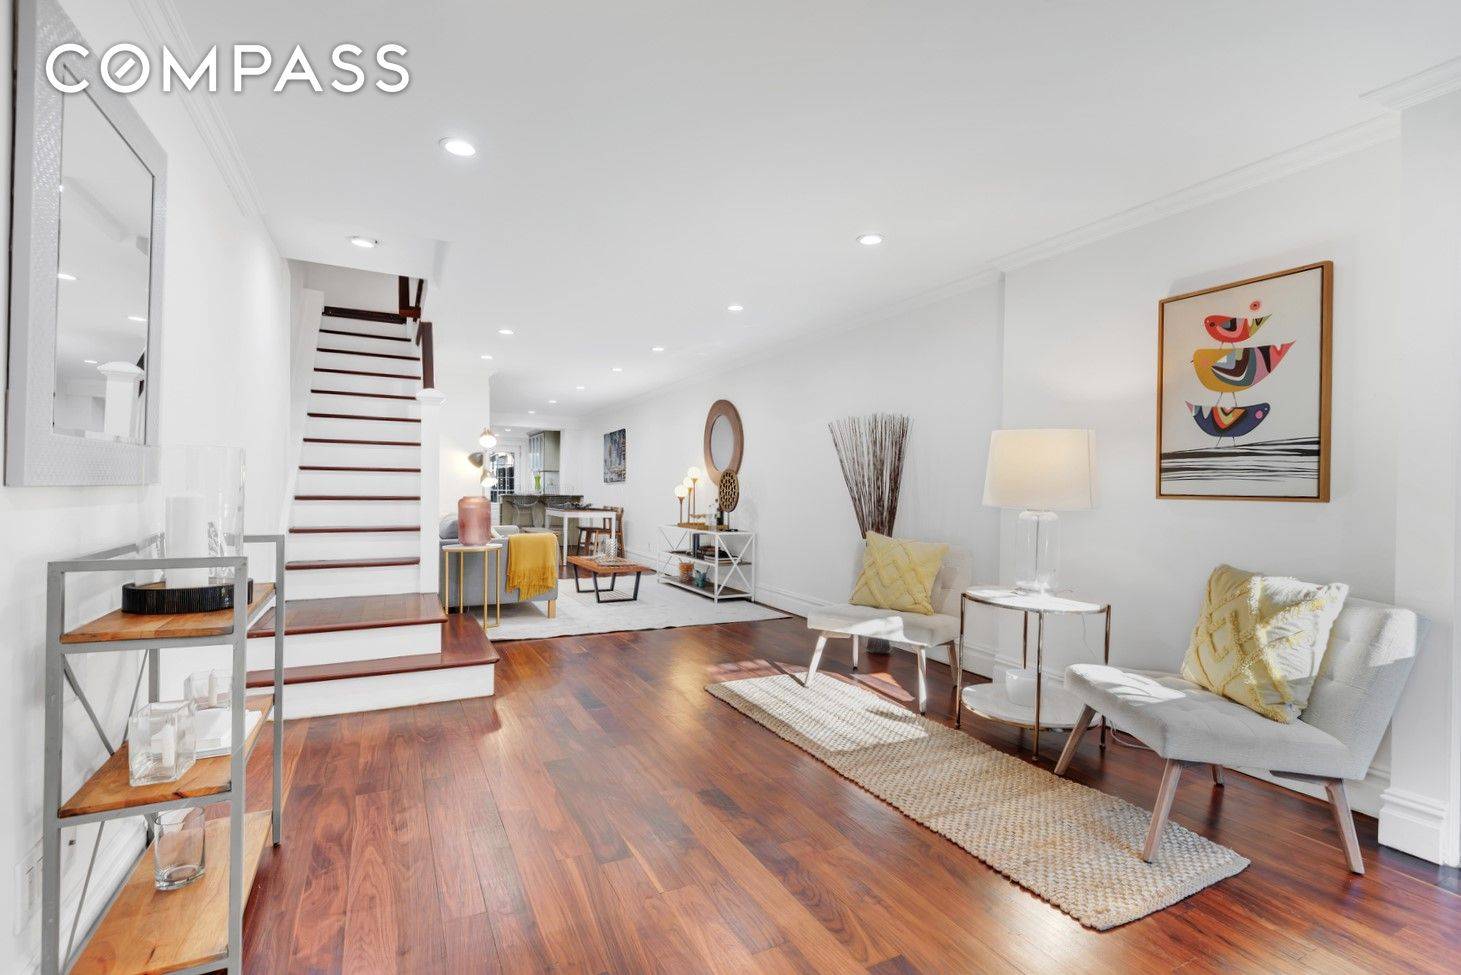 Come explore the charm and uniqueness of this exceptional four story, two unit Brownstone, set on one of the best blocks in vibrant Carroll Gardens.